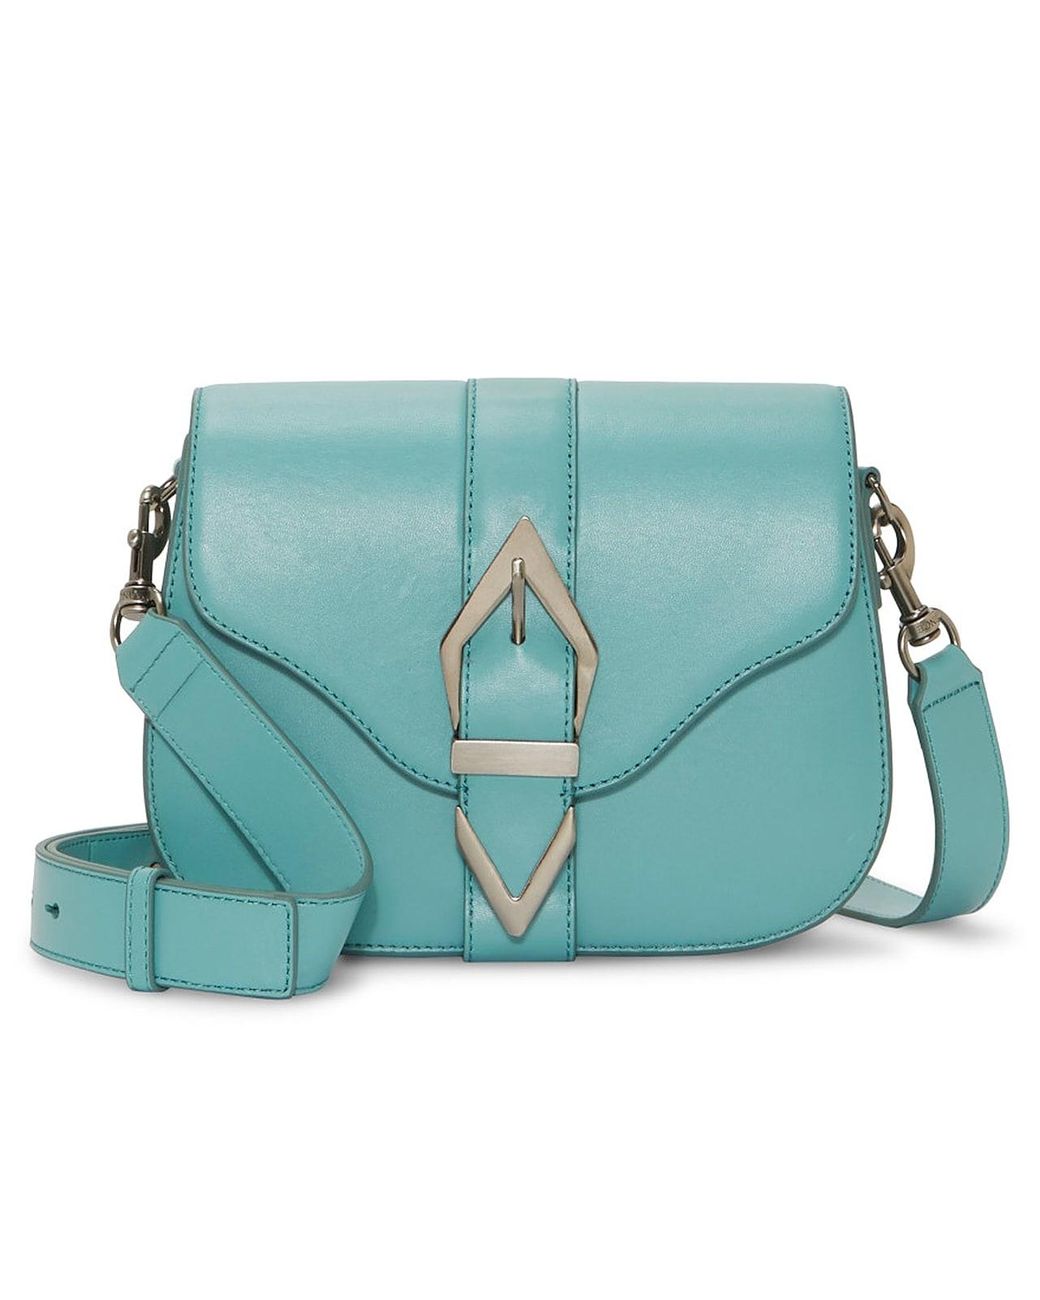 Vince Camuto Passo Leather Crossbody Bag in Blue | Lyst